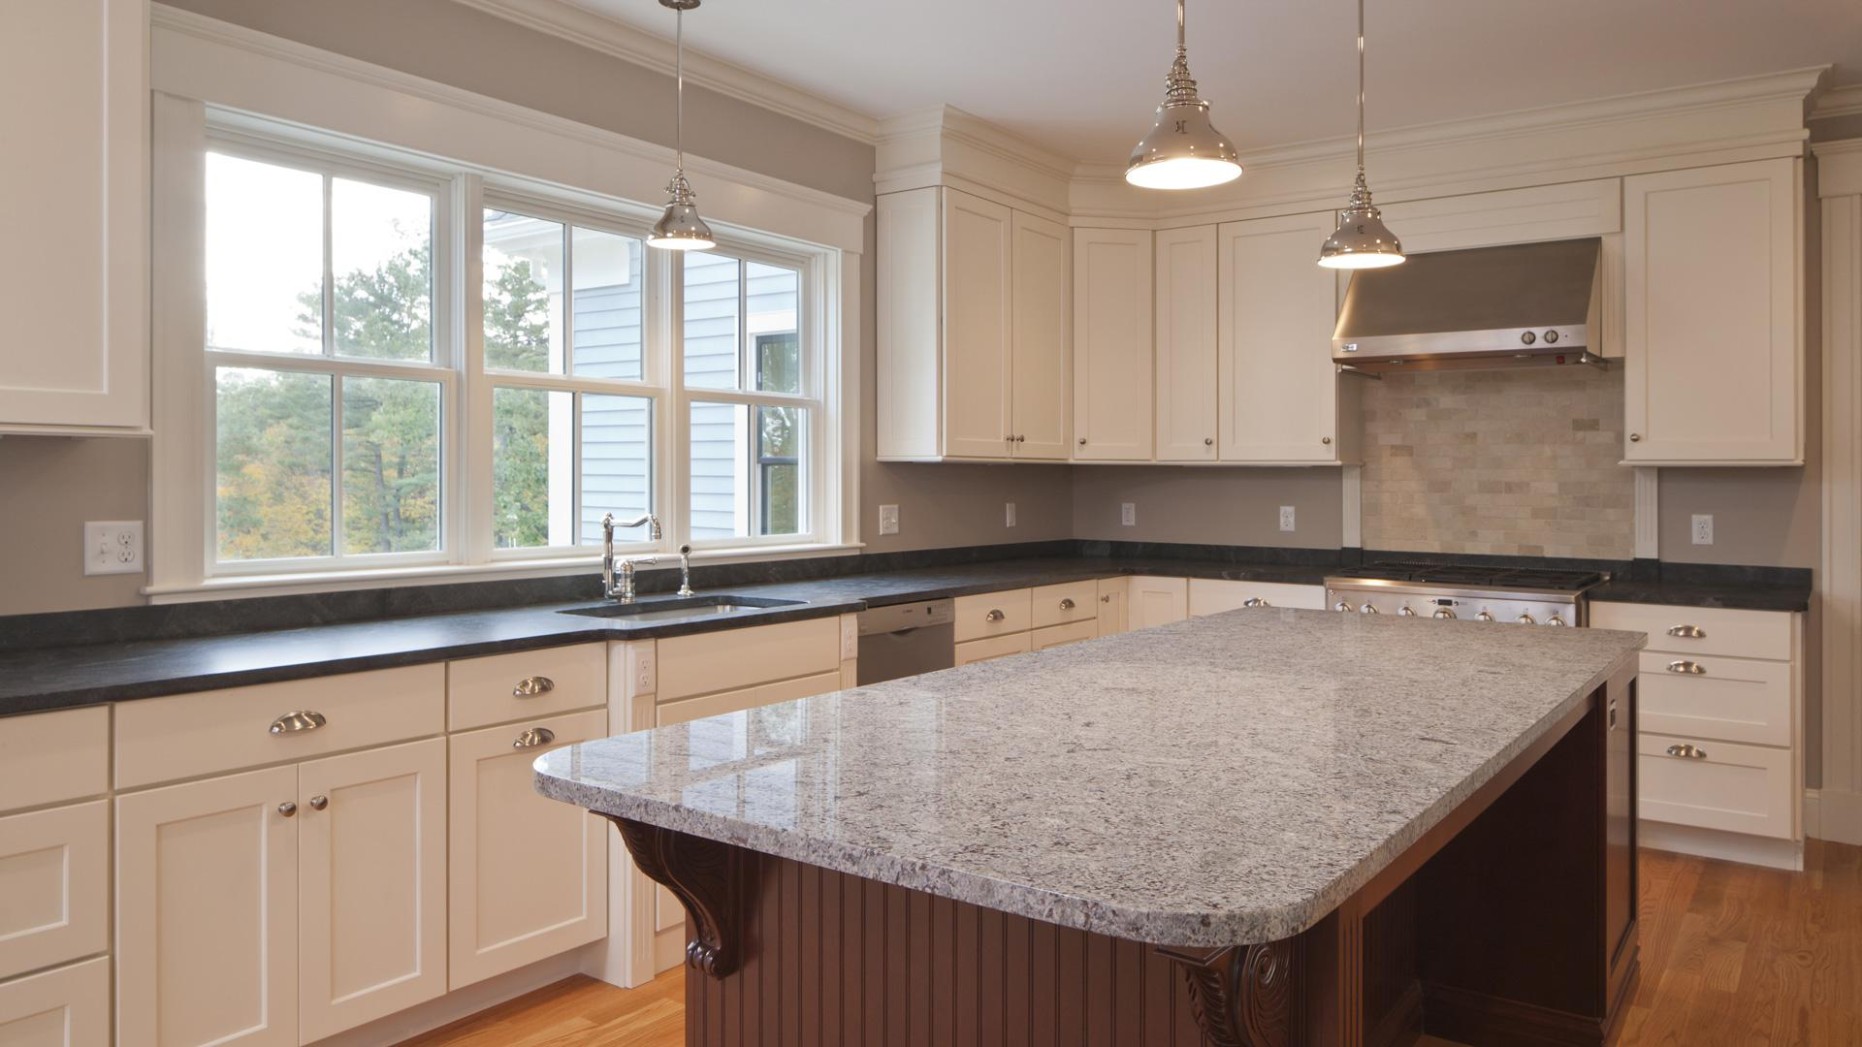 PHOTOS: Proof your kitchen countertops don